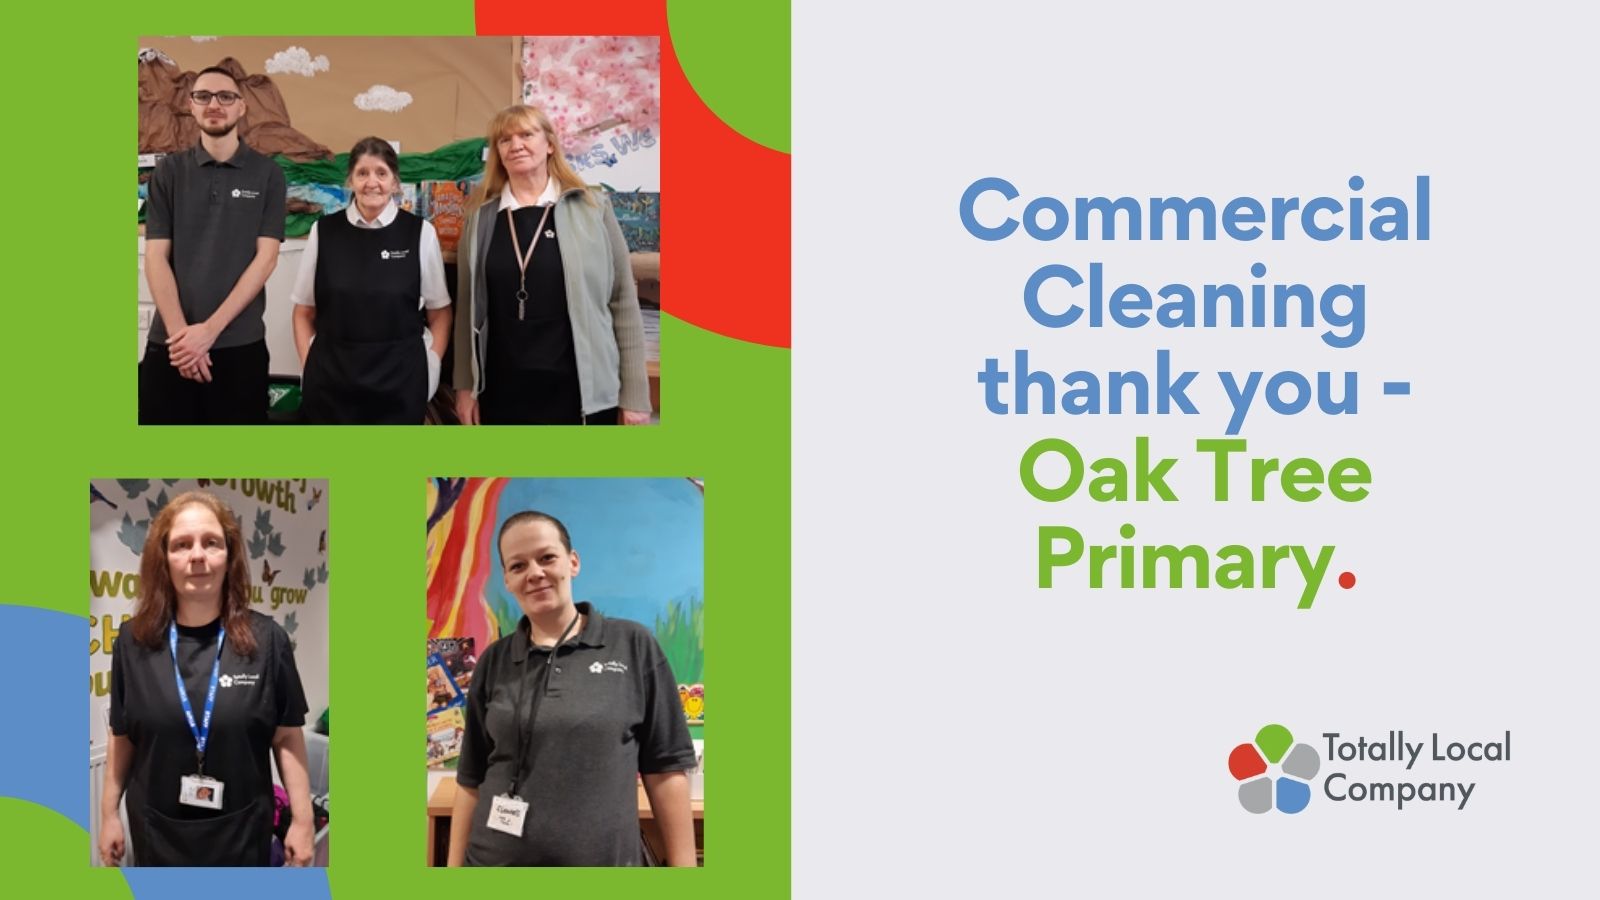 wording - commercial cleaning thank you oak tree primary, with a photograph of 5 members of the team, one man and four women